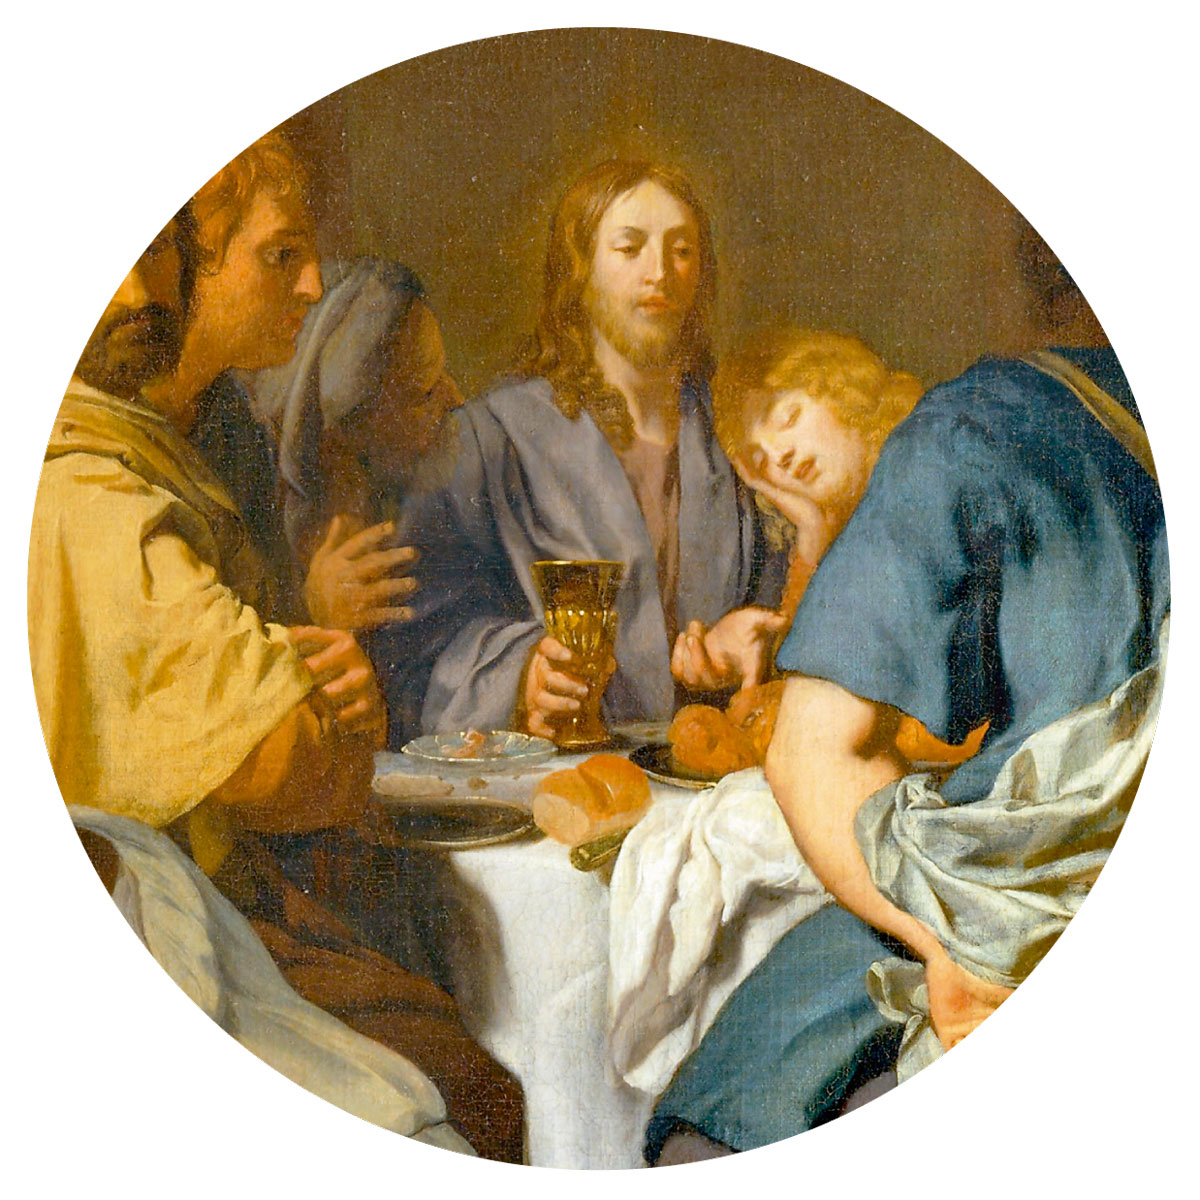 A detail from a circa sixteen seventy painting by Gérard de Lairesse titled “The Institution of the Eucharist (Last Supper).”